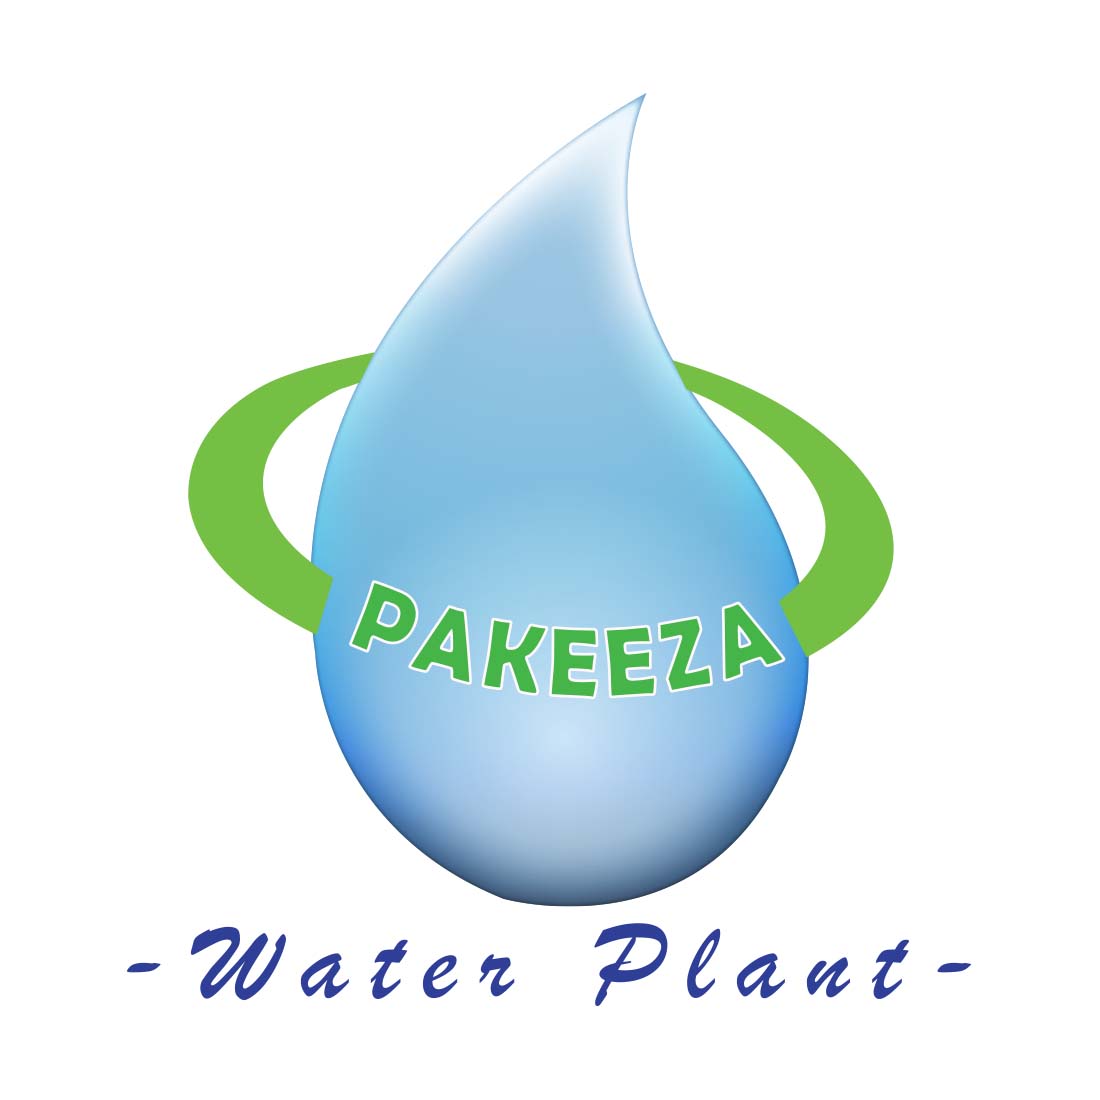 Creative Water Plant Emblem cover image.